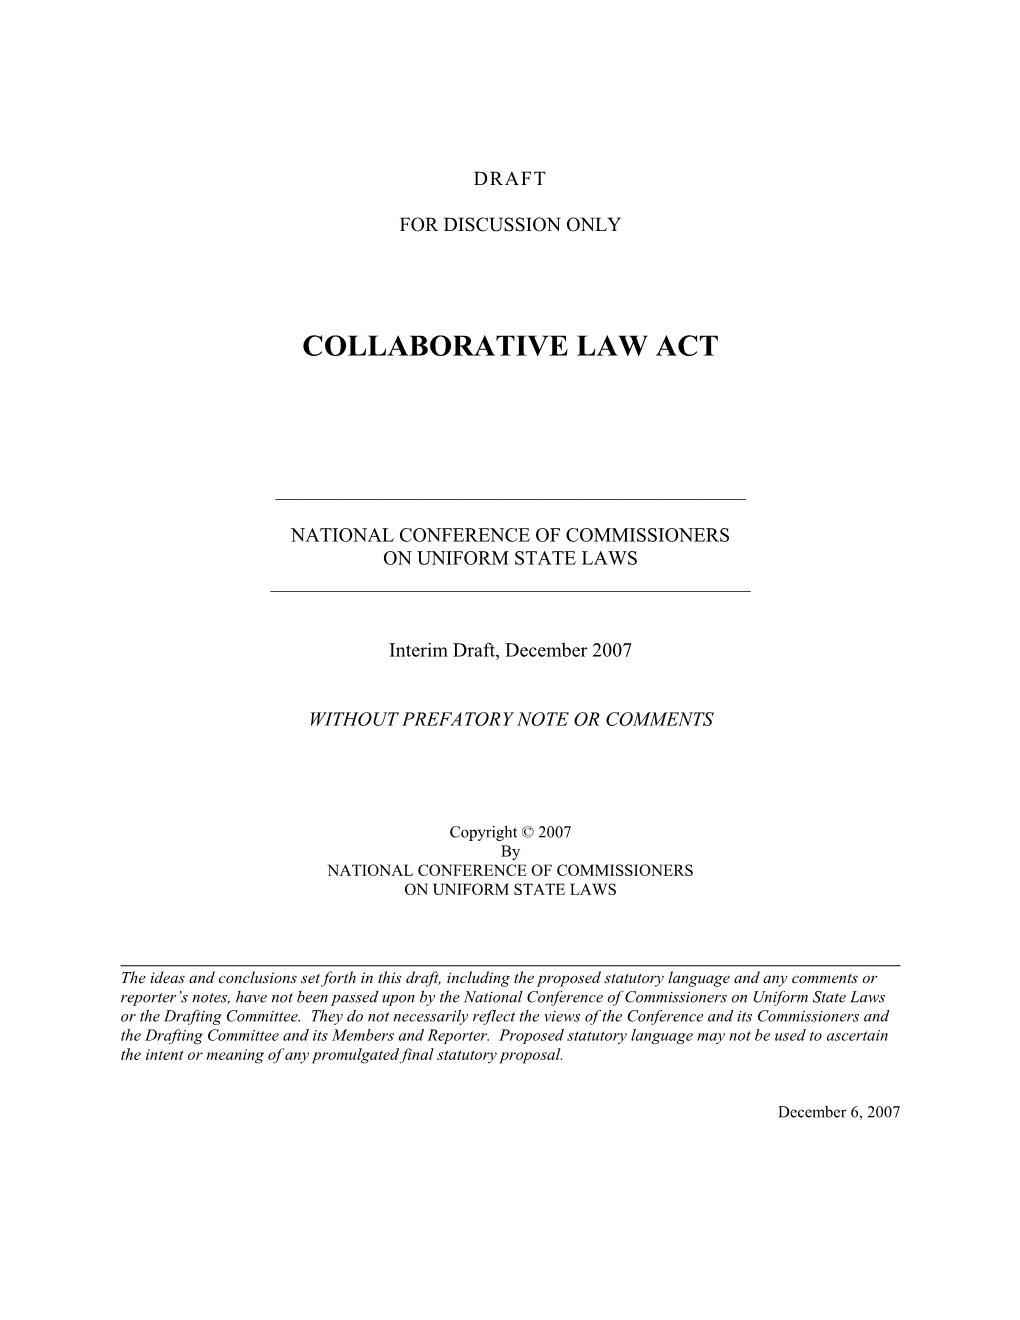 Collaborative Law Act